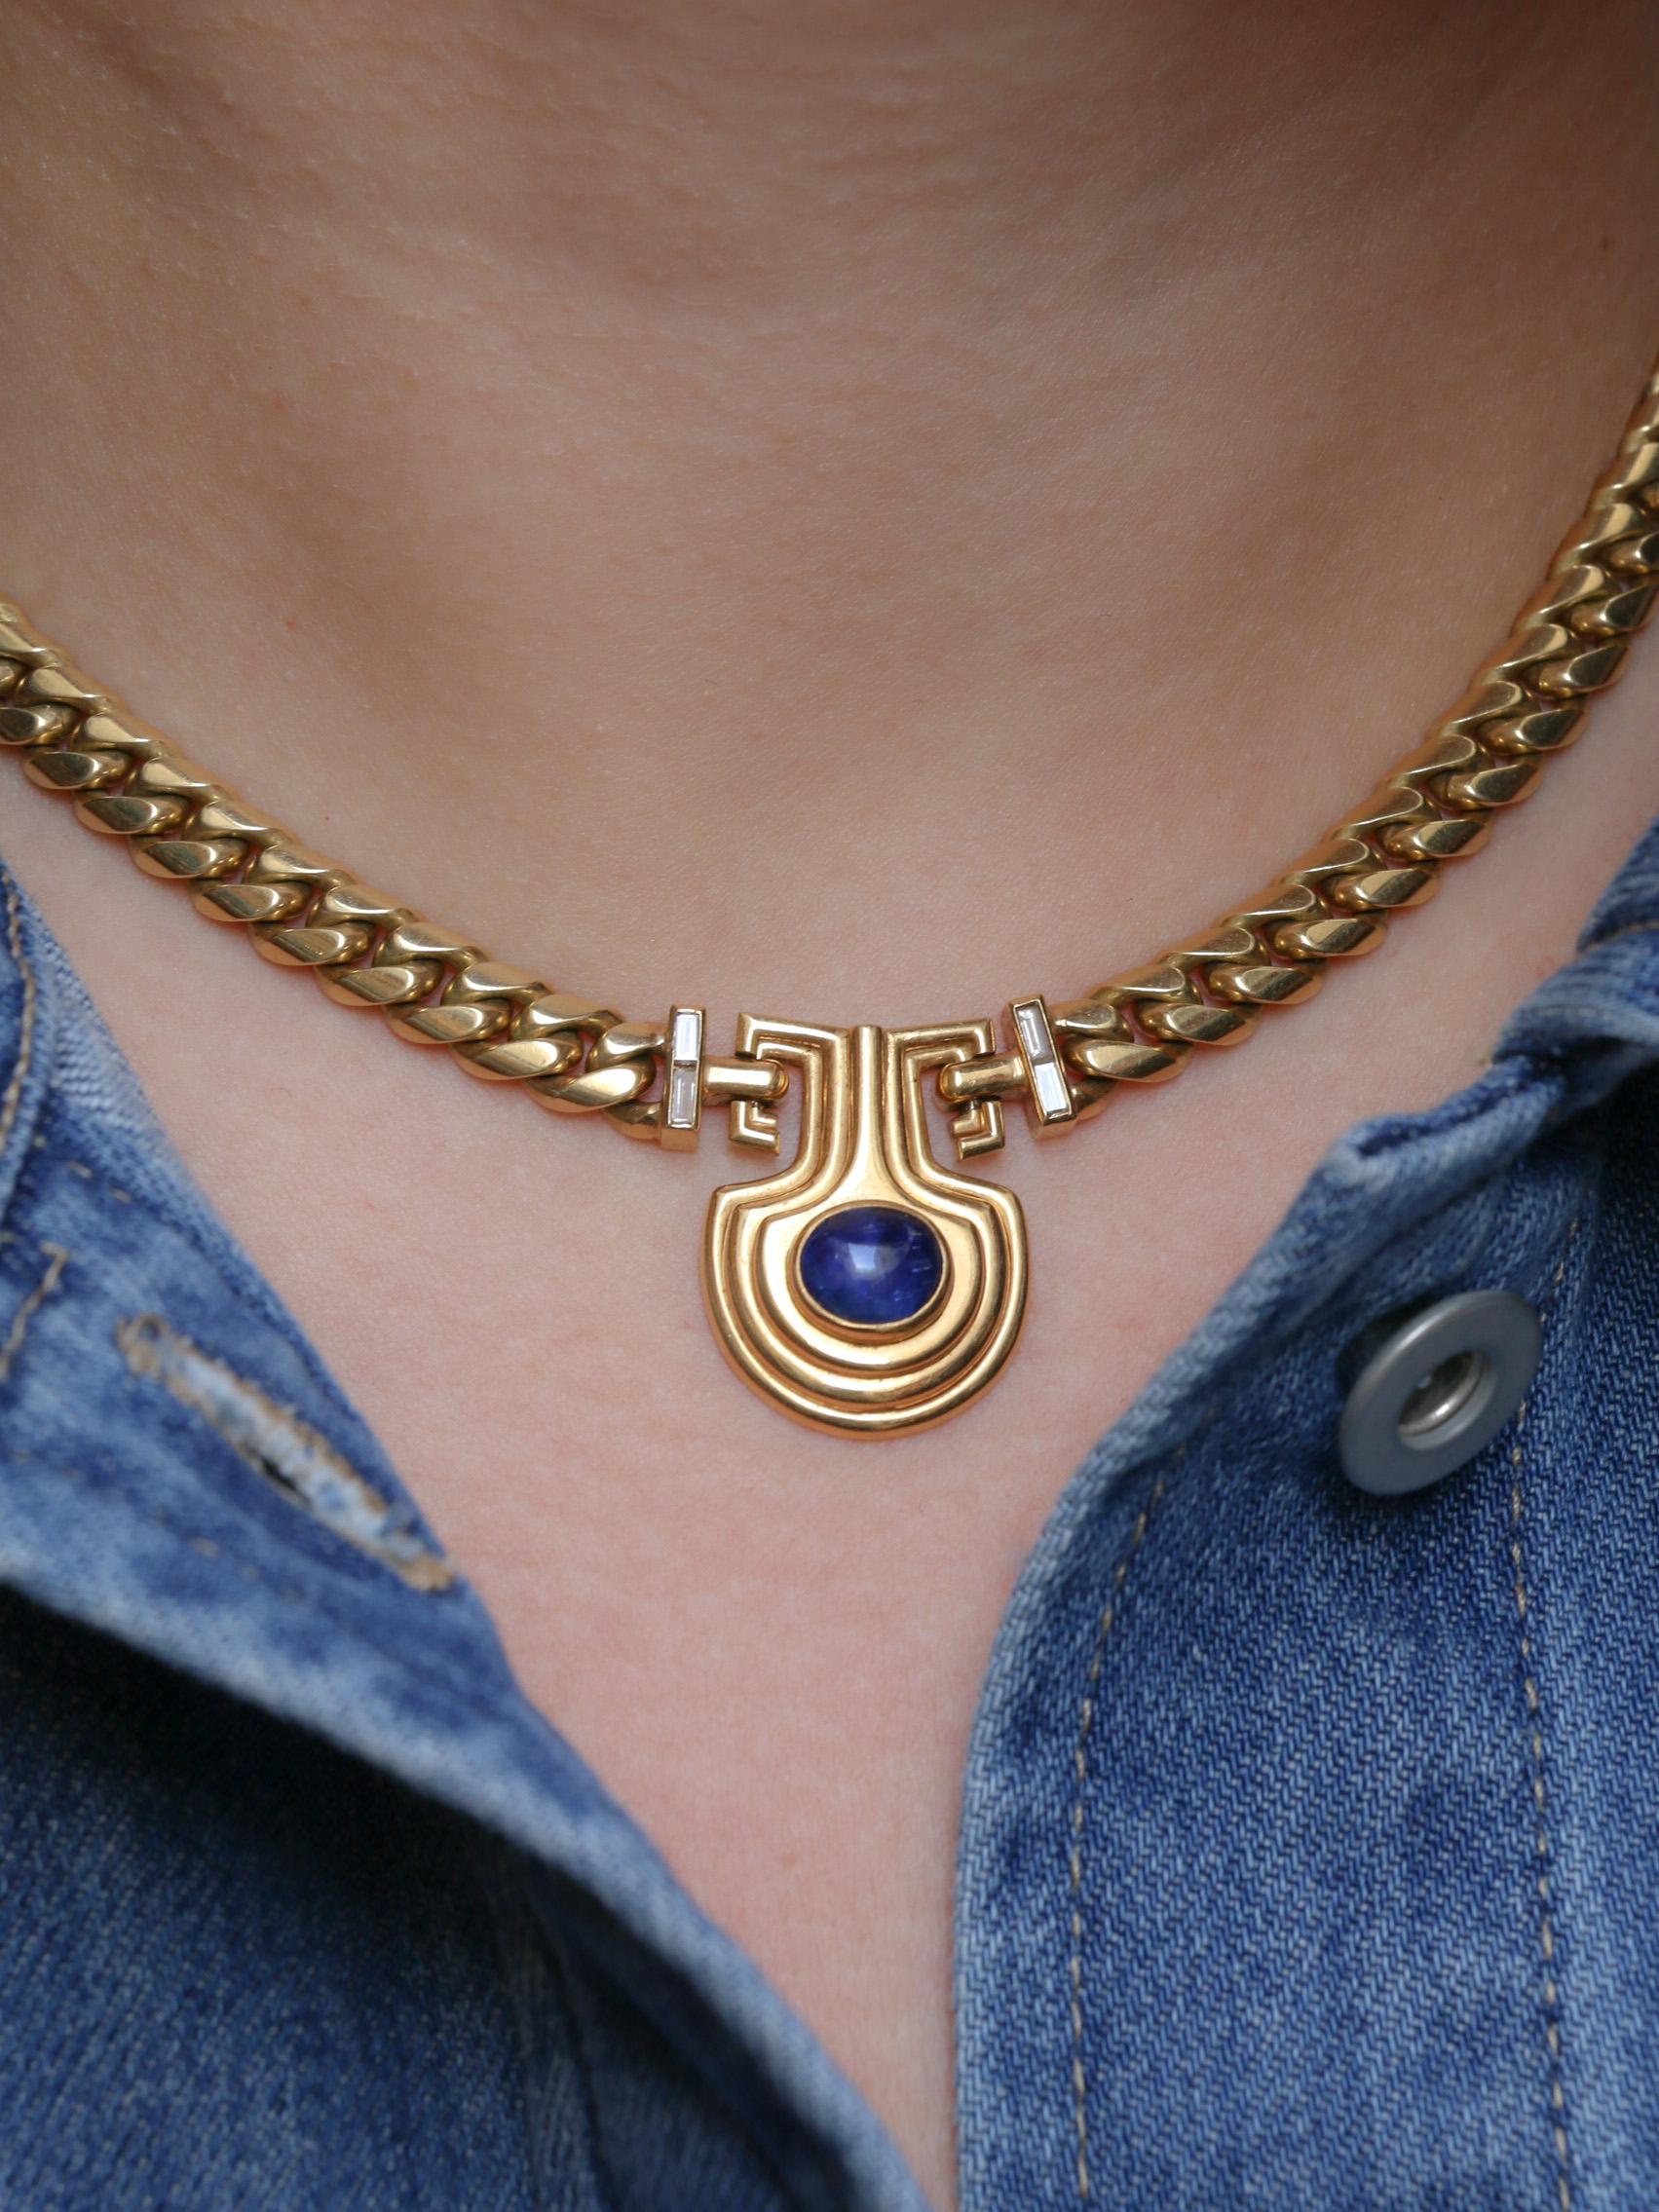 18Kt (750°/°°) yellow gold necklace featuring a gourmette chain and a pendant with a 2.55-carat (8.3 x 6.7 x 4.2 mm) royal-blue cabochon sapphire set in a gadrooned amphora. Open frosting and fractures are visible on the back of the cabochon.